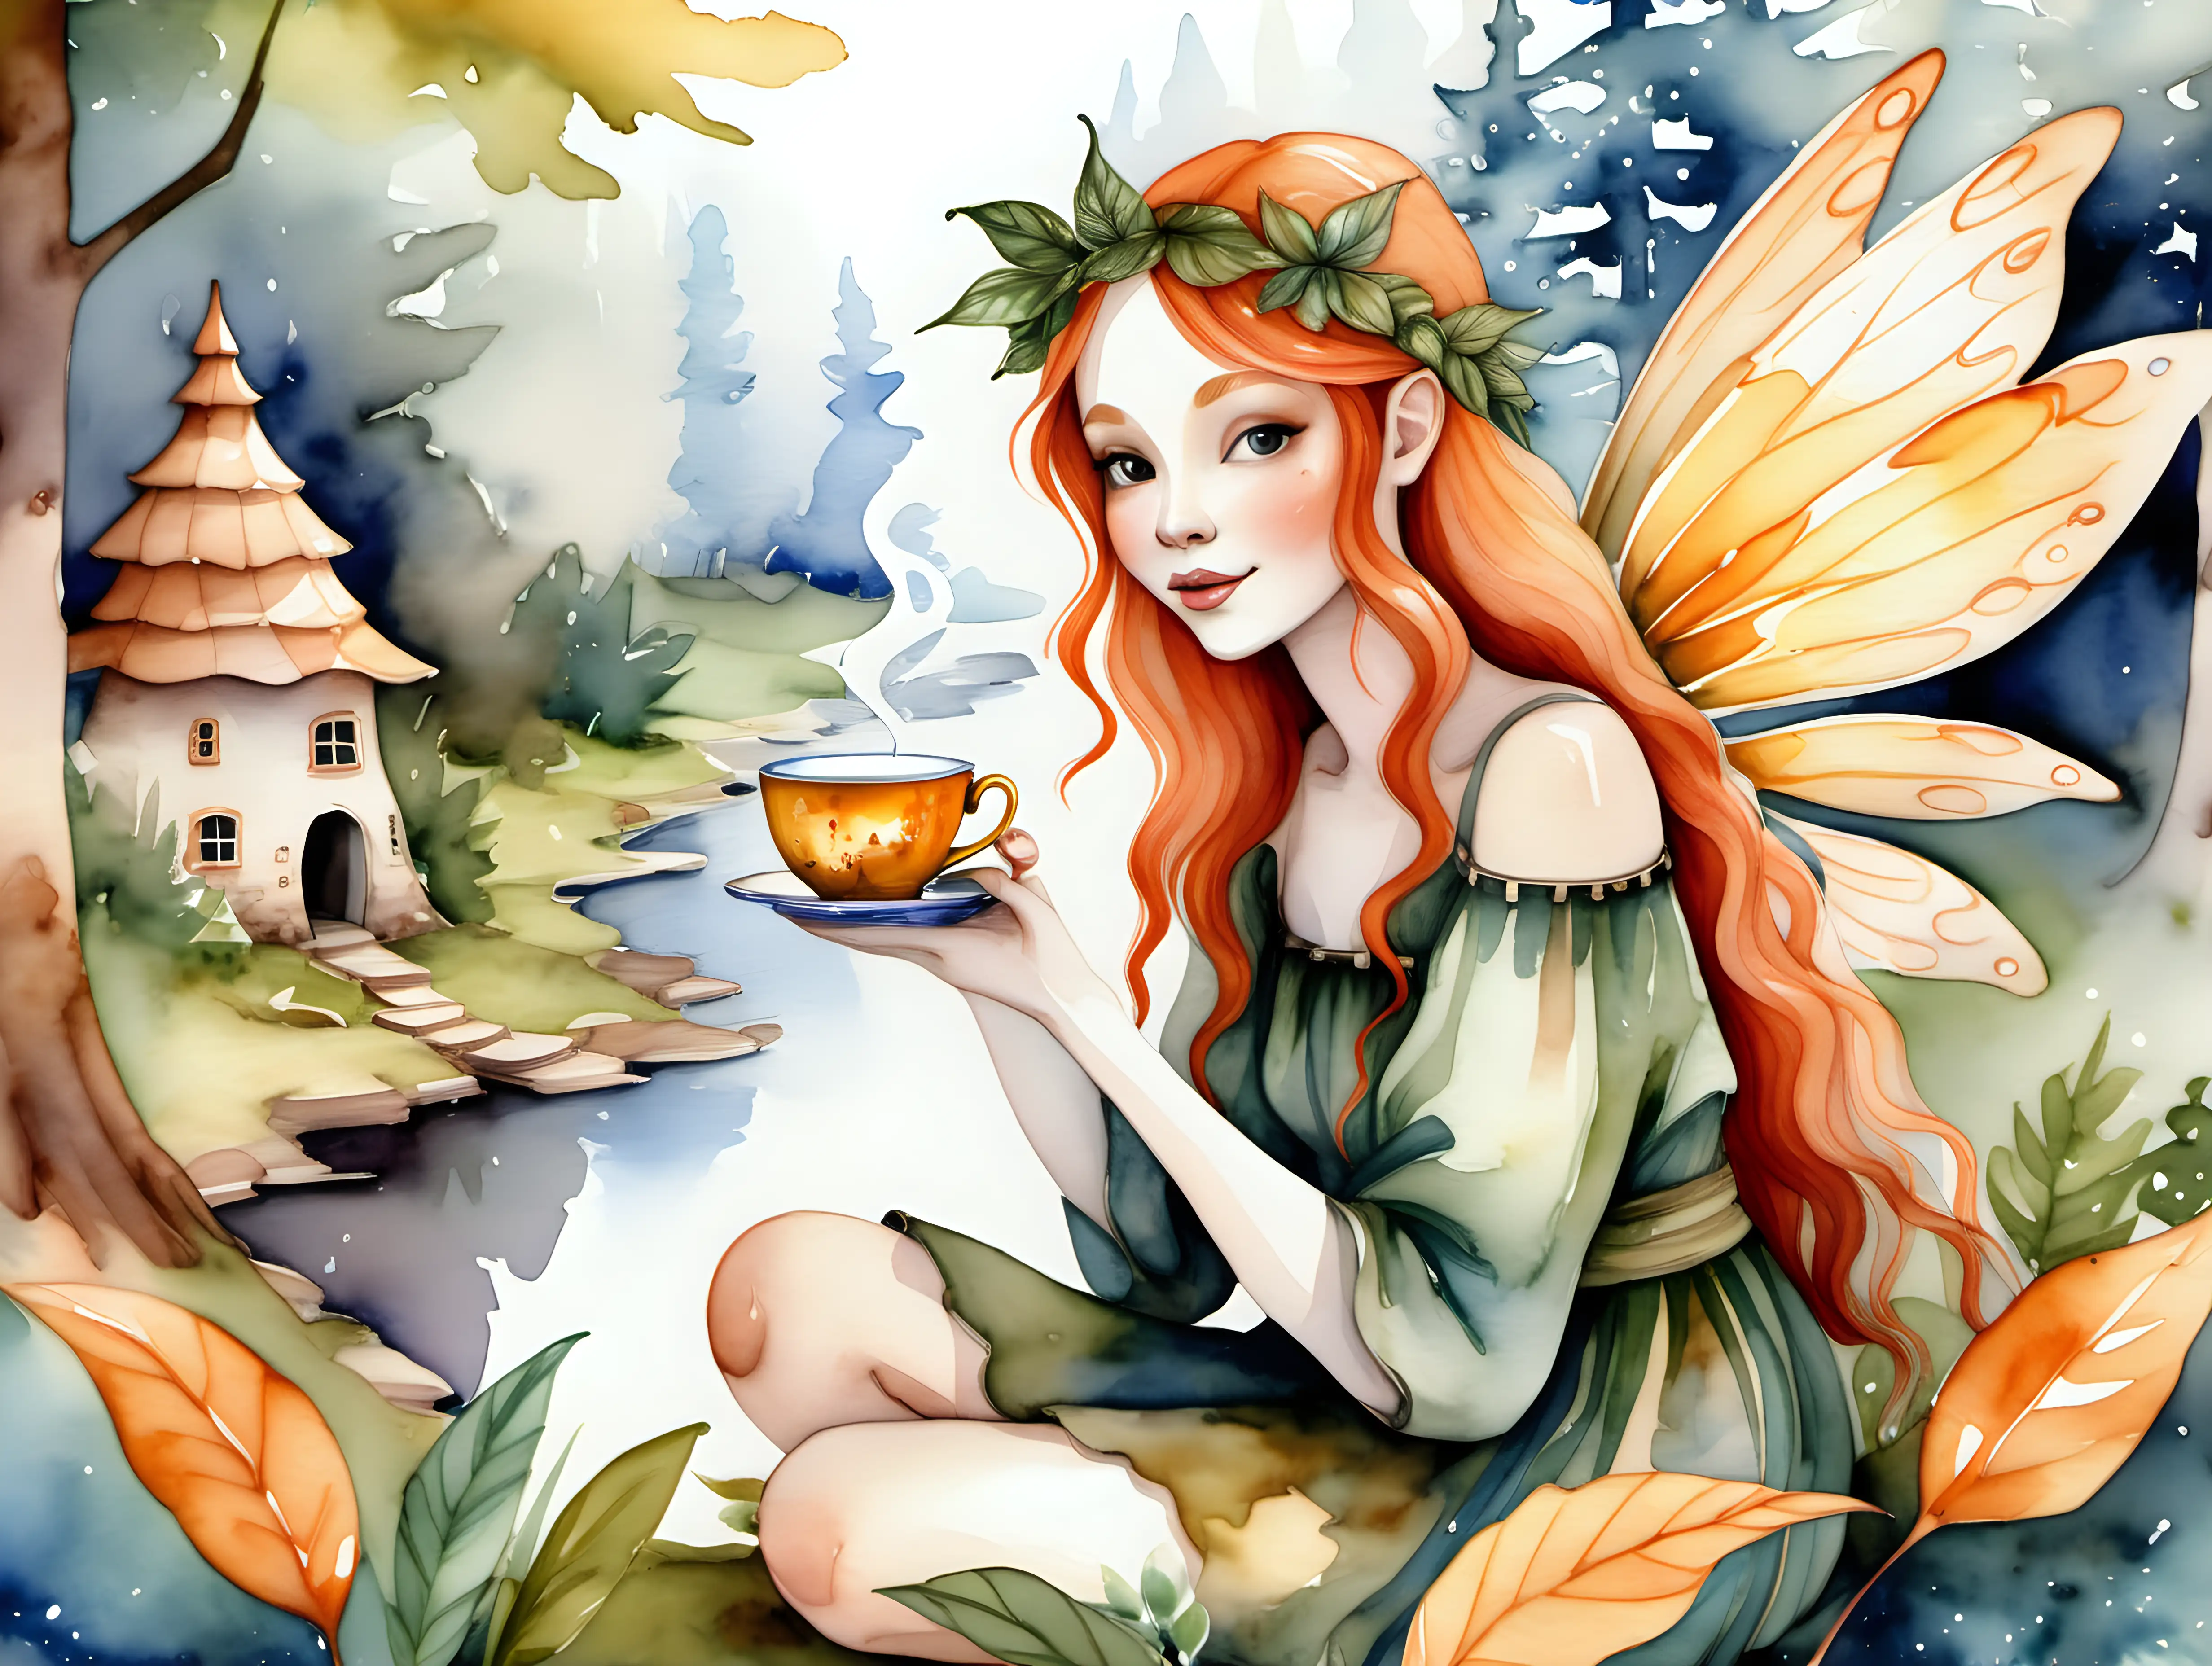 Enchanting Ginger Fairy Enjoying Tea in Watercolor Forest Village